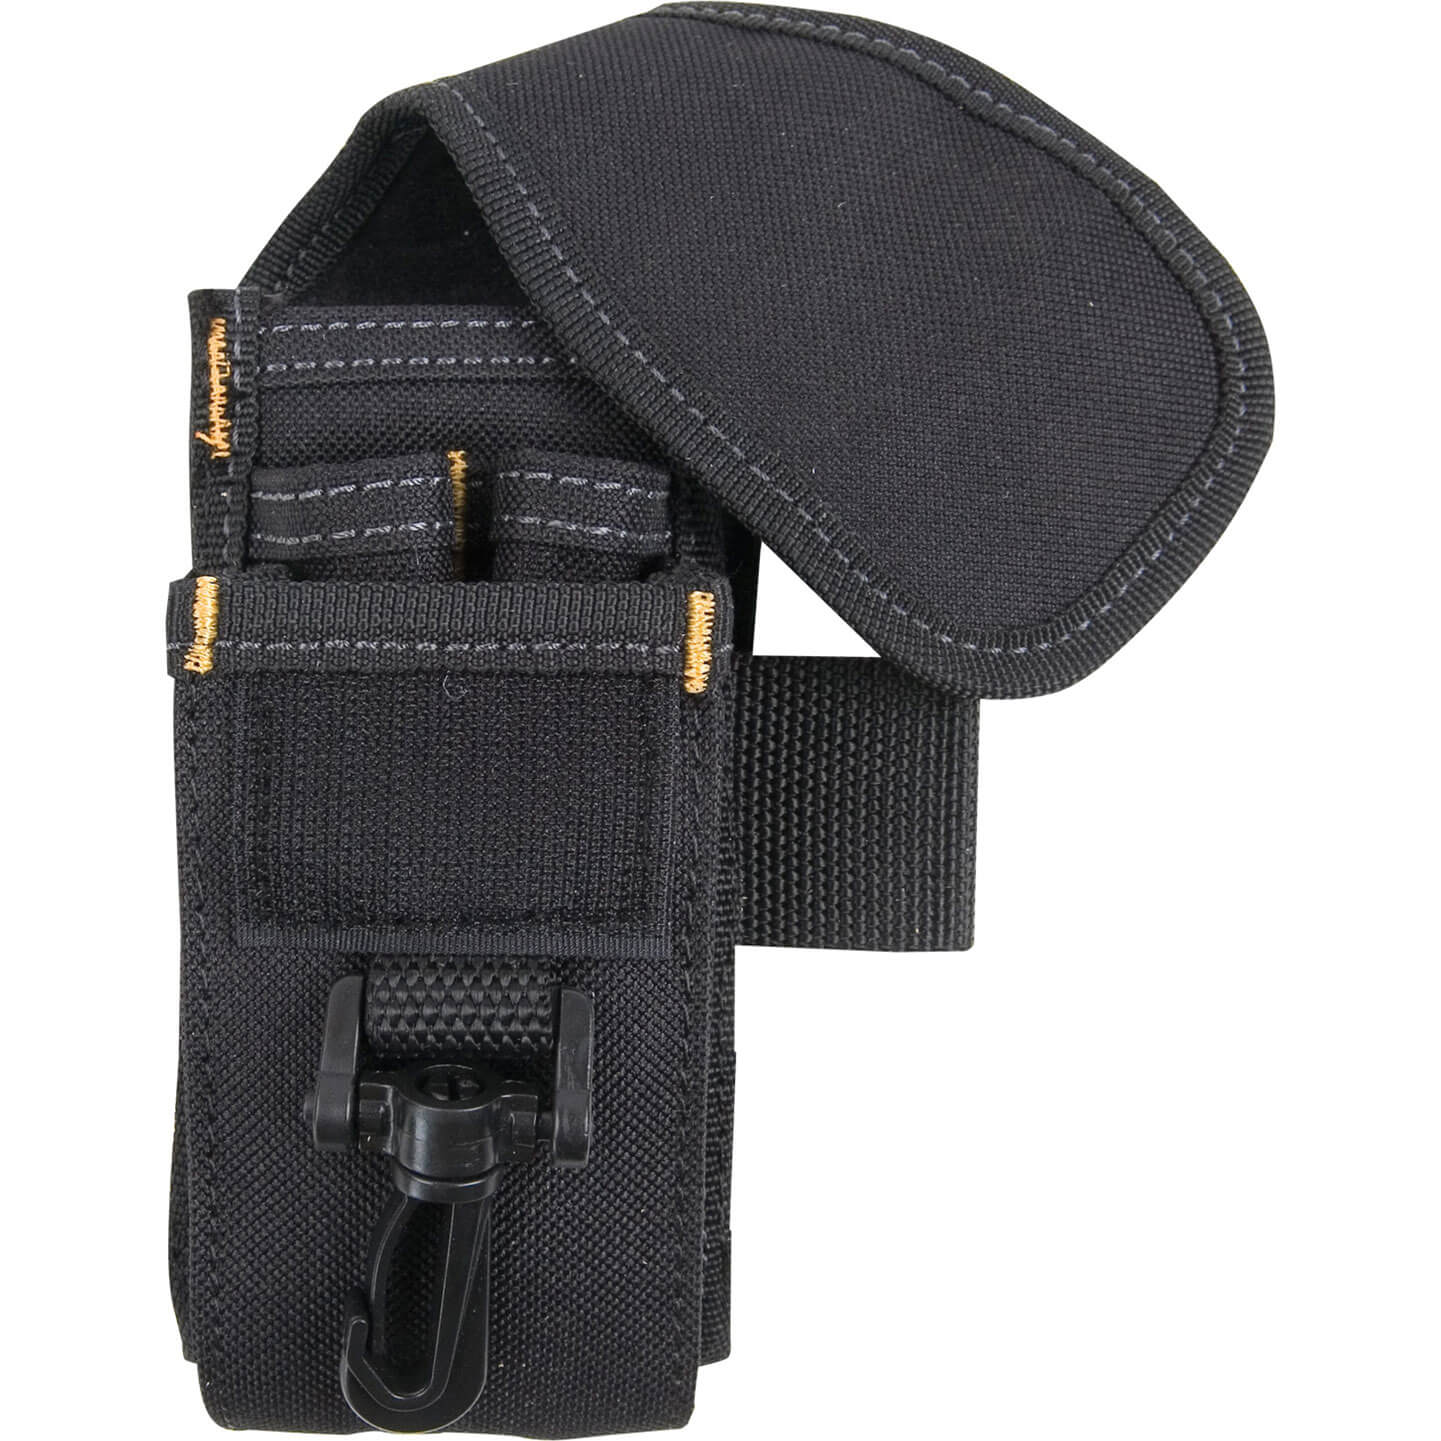 Image of Kunys 5 Pocket Mobile Phone Pouch and Tool Holder